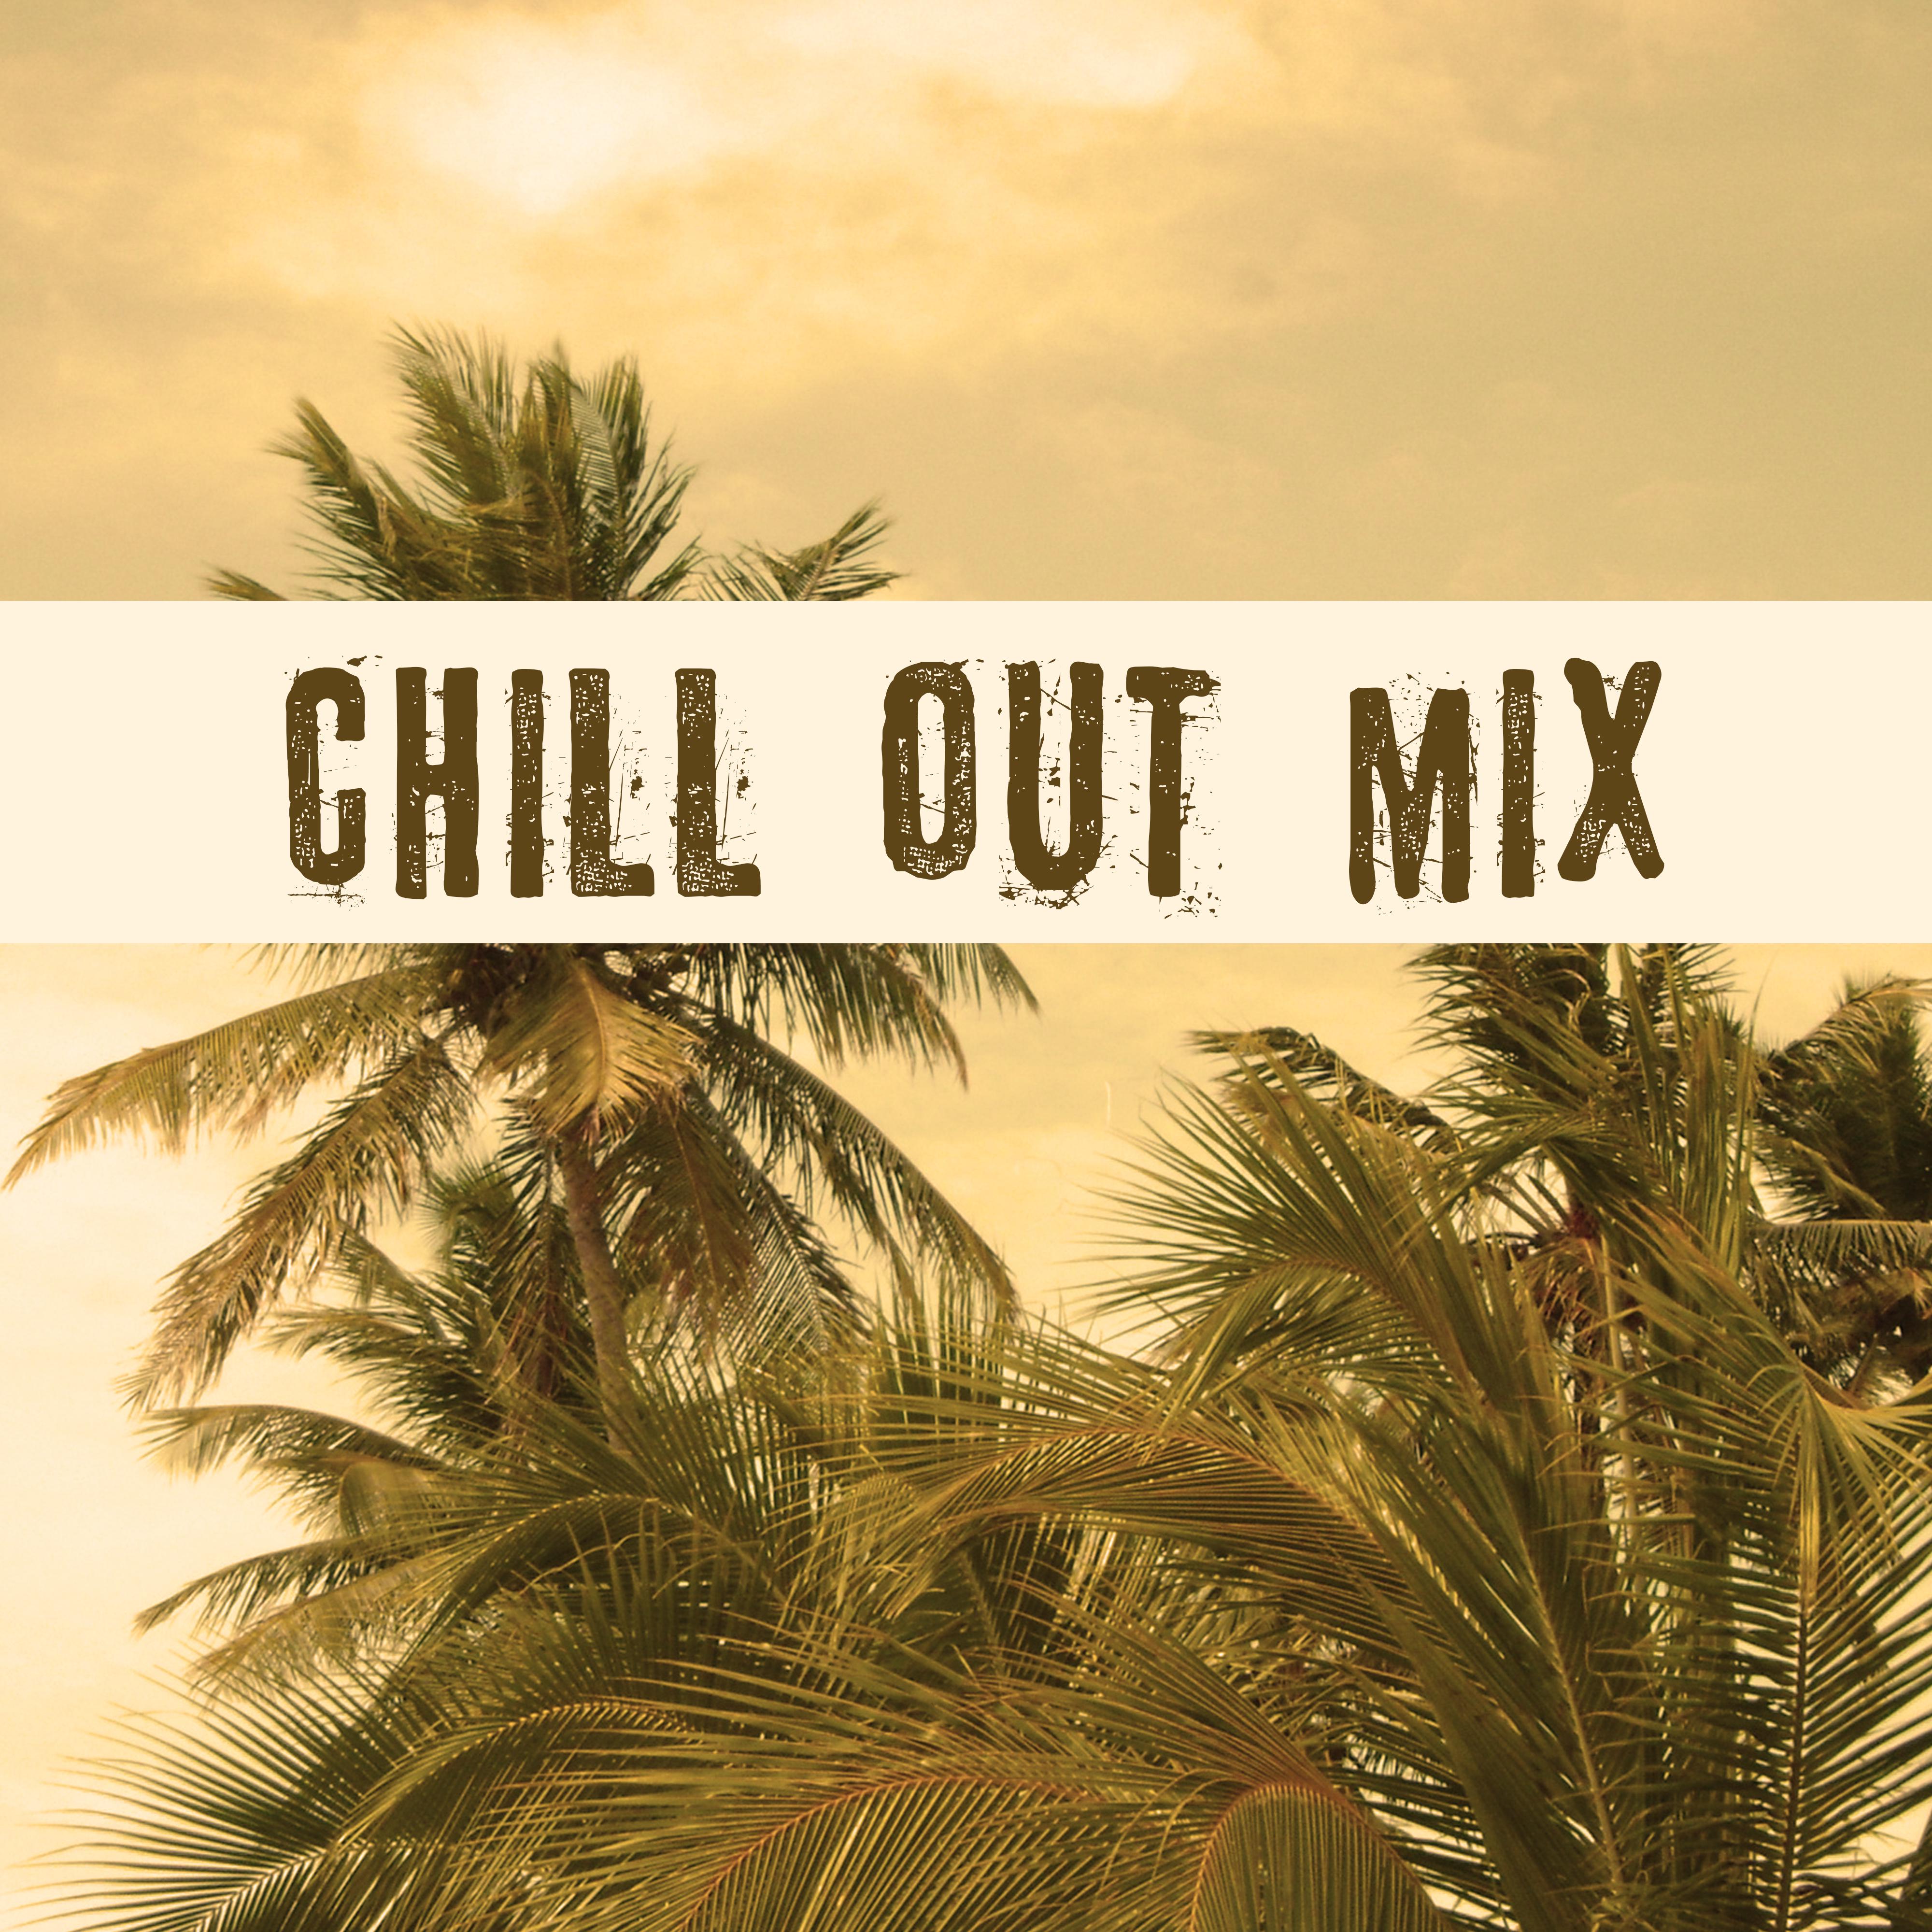 Chill Out Mix  Lounge Ambient, Best Chill Out Music, Pure Relaxation, Asian Chill, Barcelona Chill Out, Ibiza Lounge, Sounds of Sea